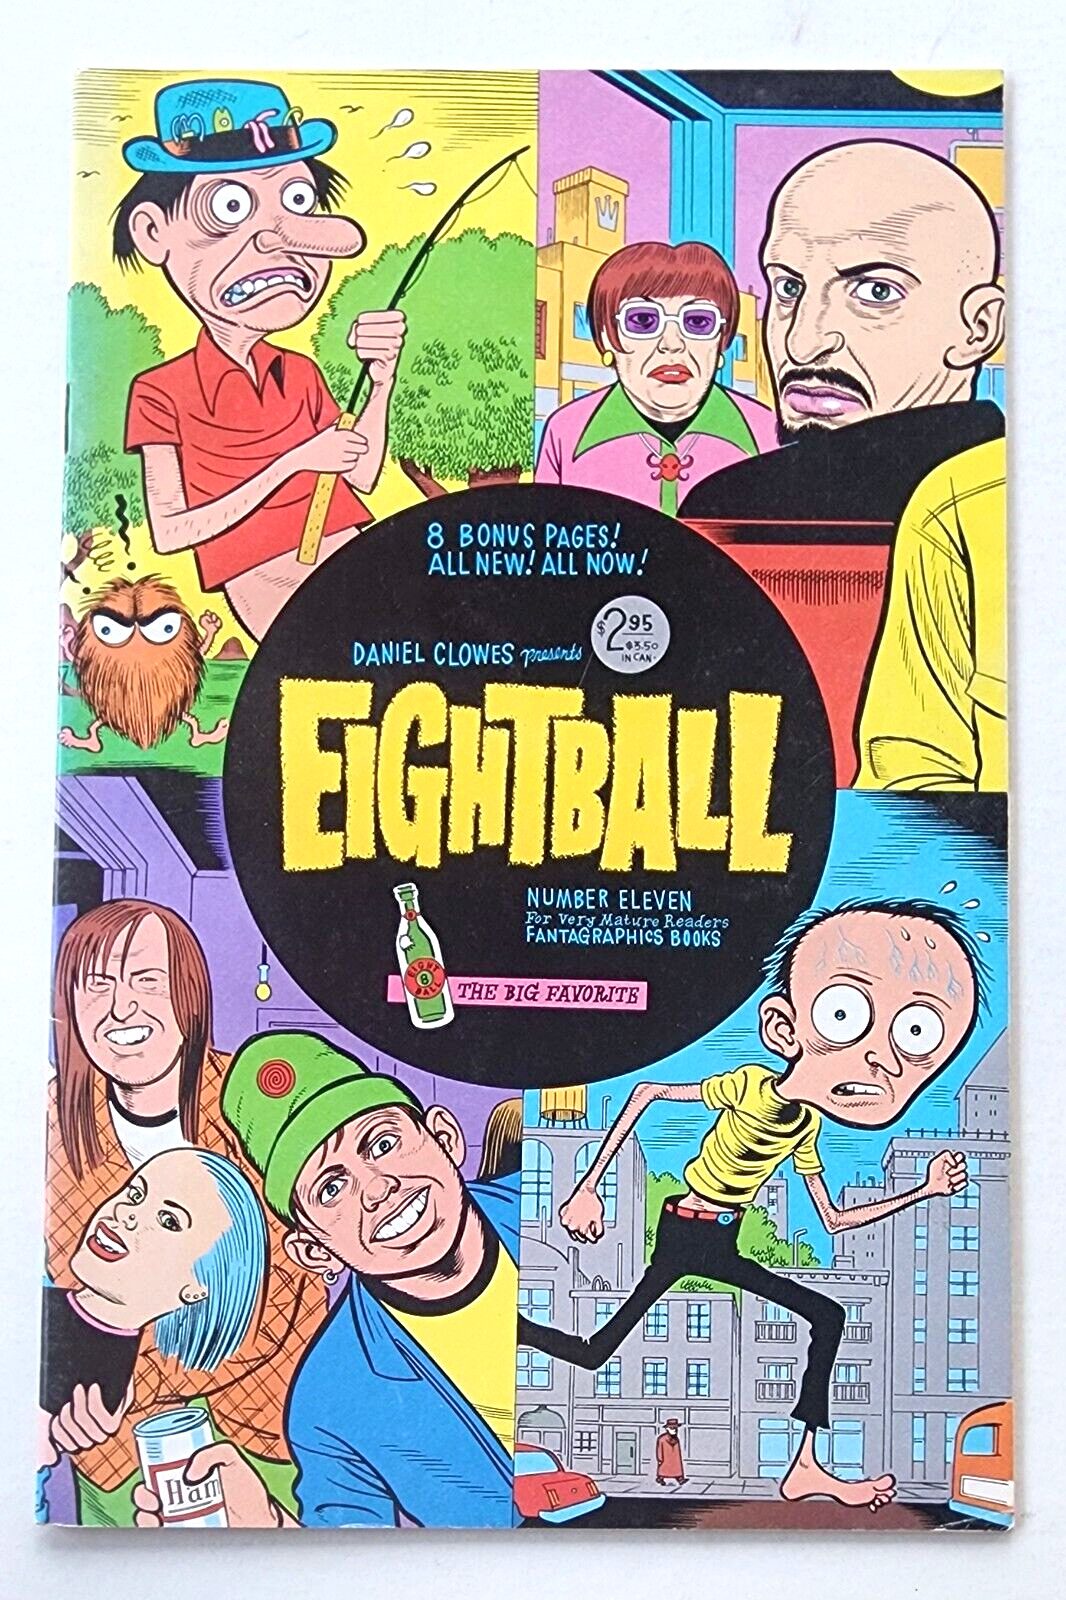 Eightball #11 (Fantagraphics 1993) Daniel Clowes - 1st Appearance of Ghost World